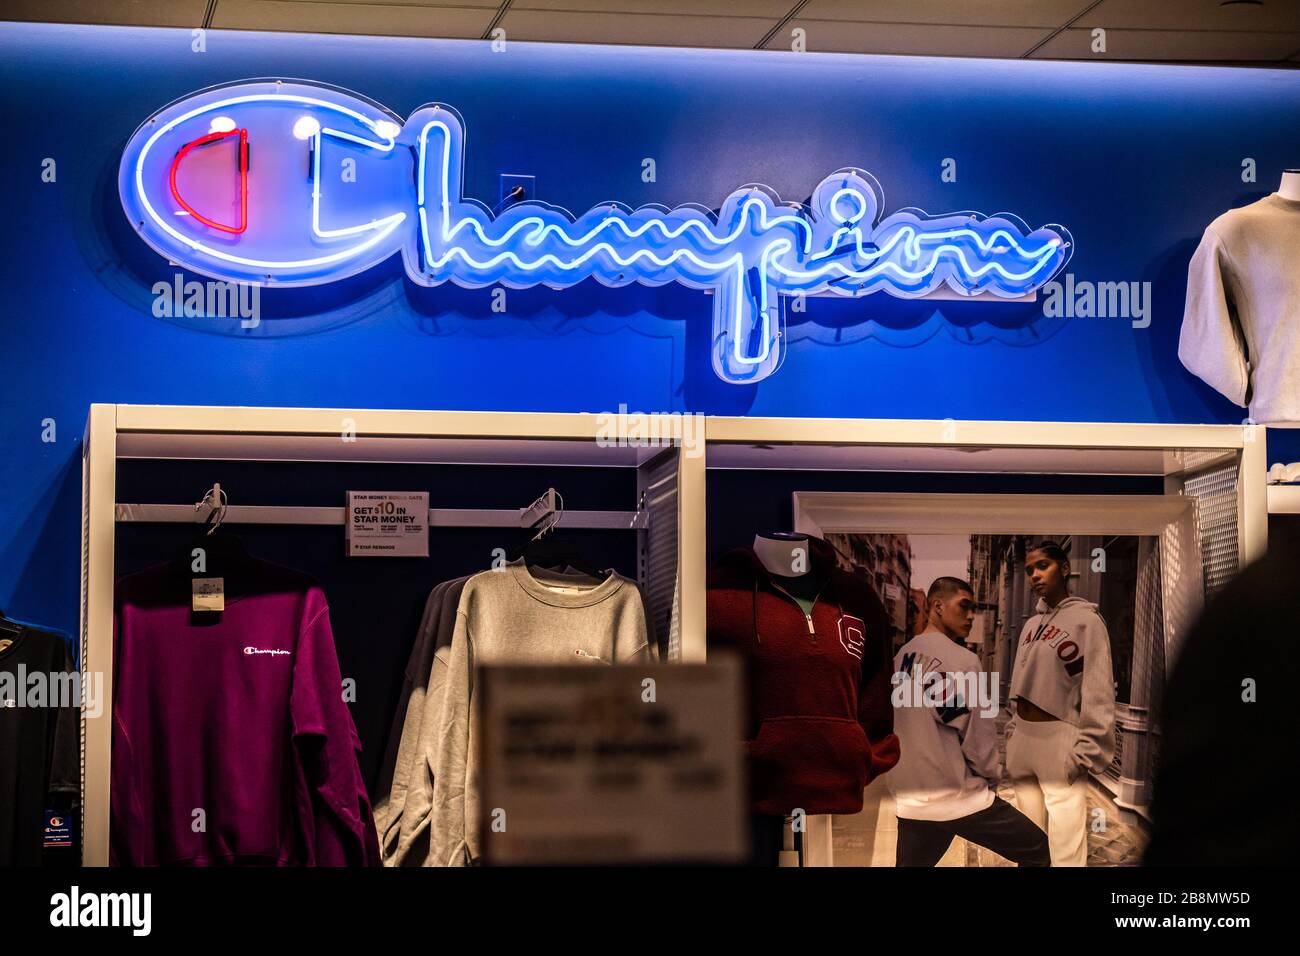 American clothing manufacturer, Champion stall seen in a Macy's department  store in New York City Stock Photo - Alamy